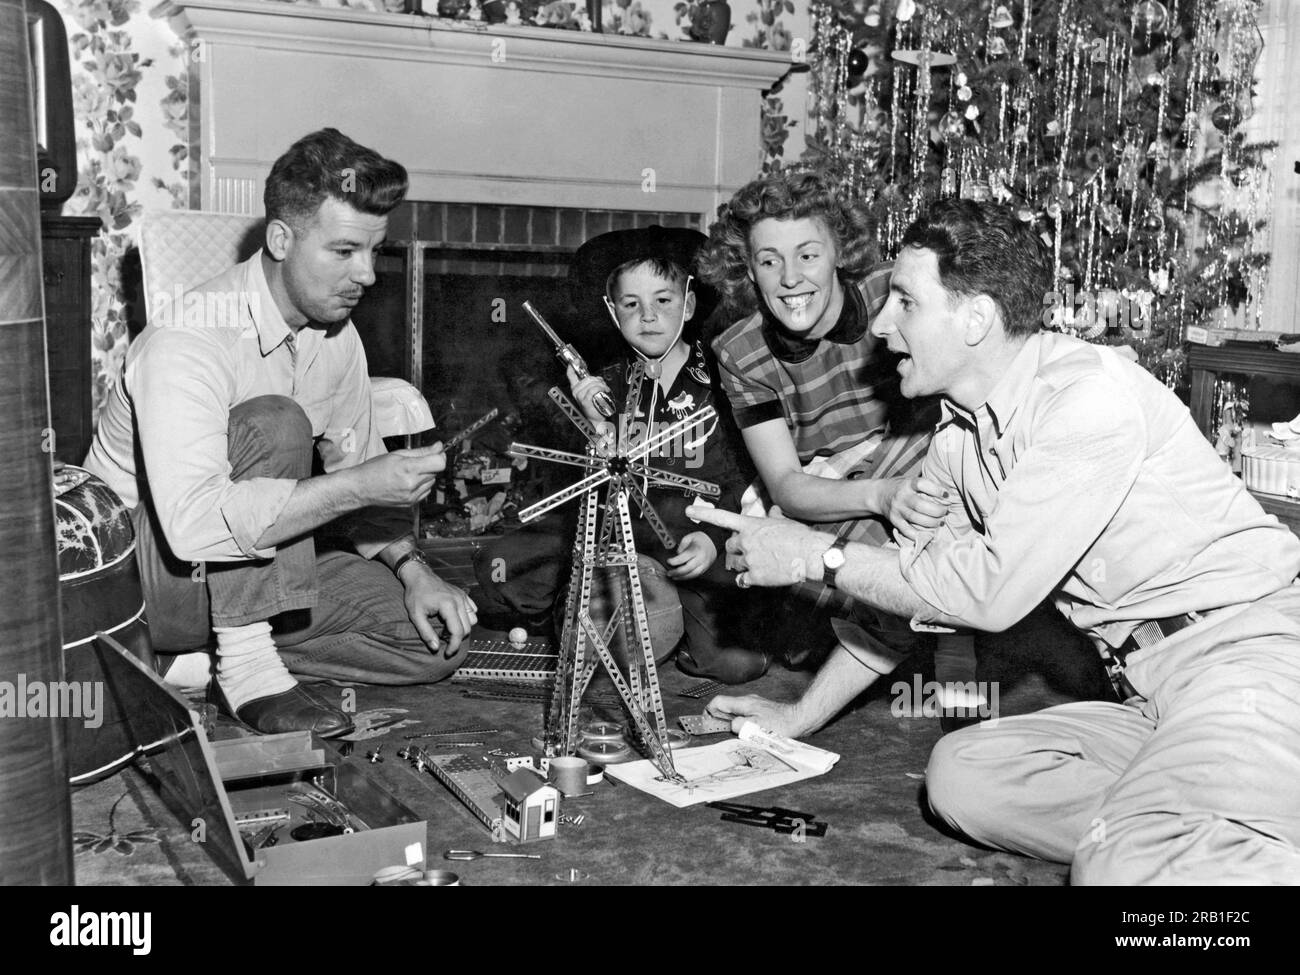 Millbrae, California:  c. 1954. A small boy dressed in a cowboy outfit watches as his parents and friend play with the erector set that he got for Christmas Stock Photo